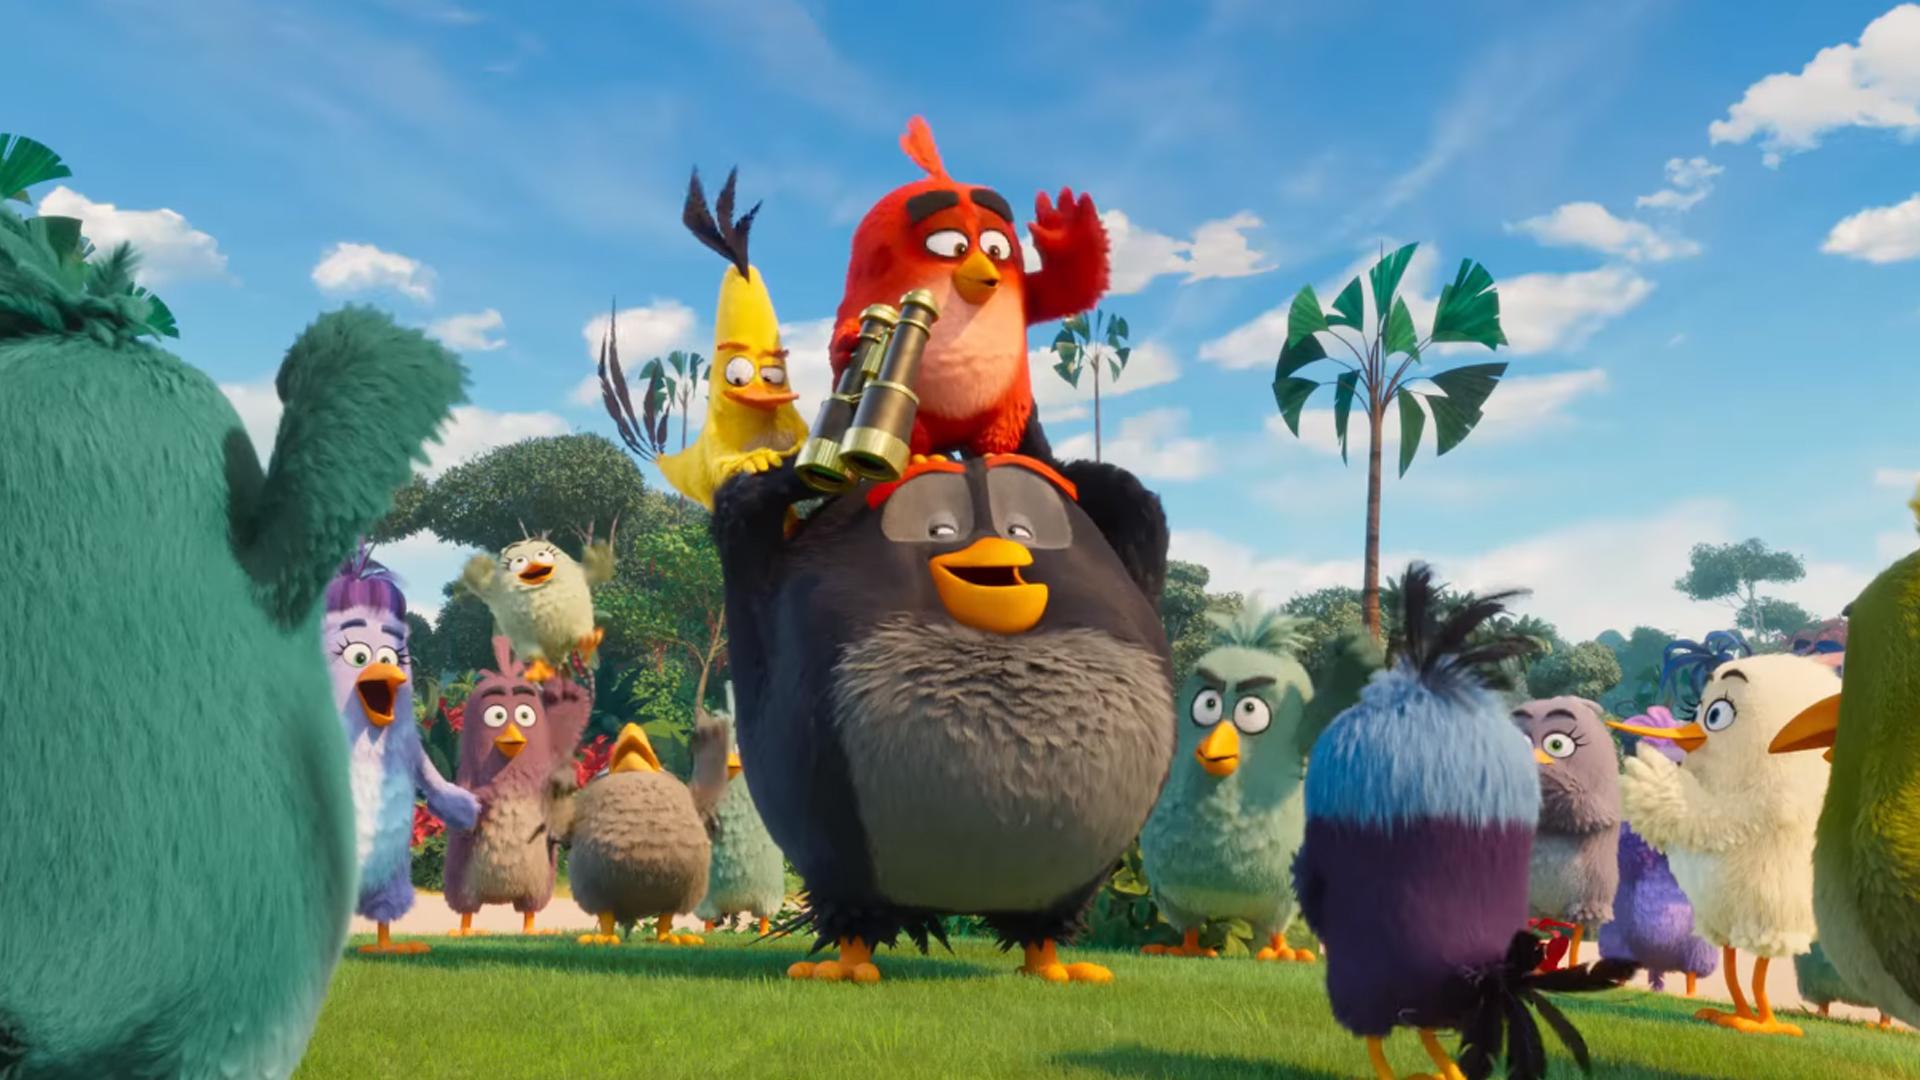 Enemies Join Forces In “The Angry Birds Movie 2”